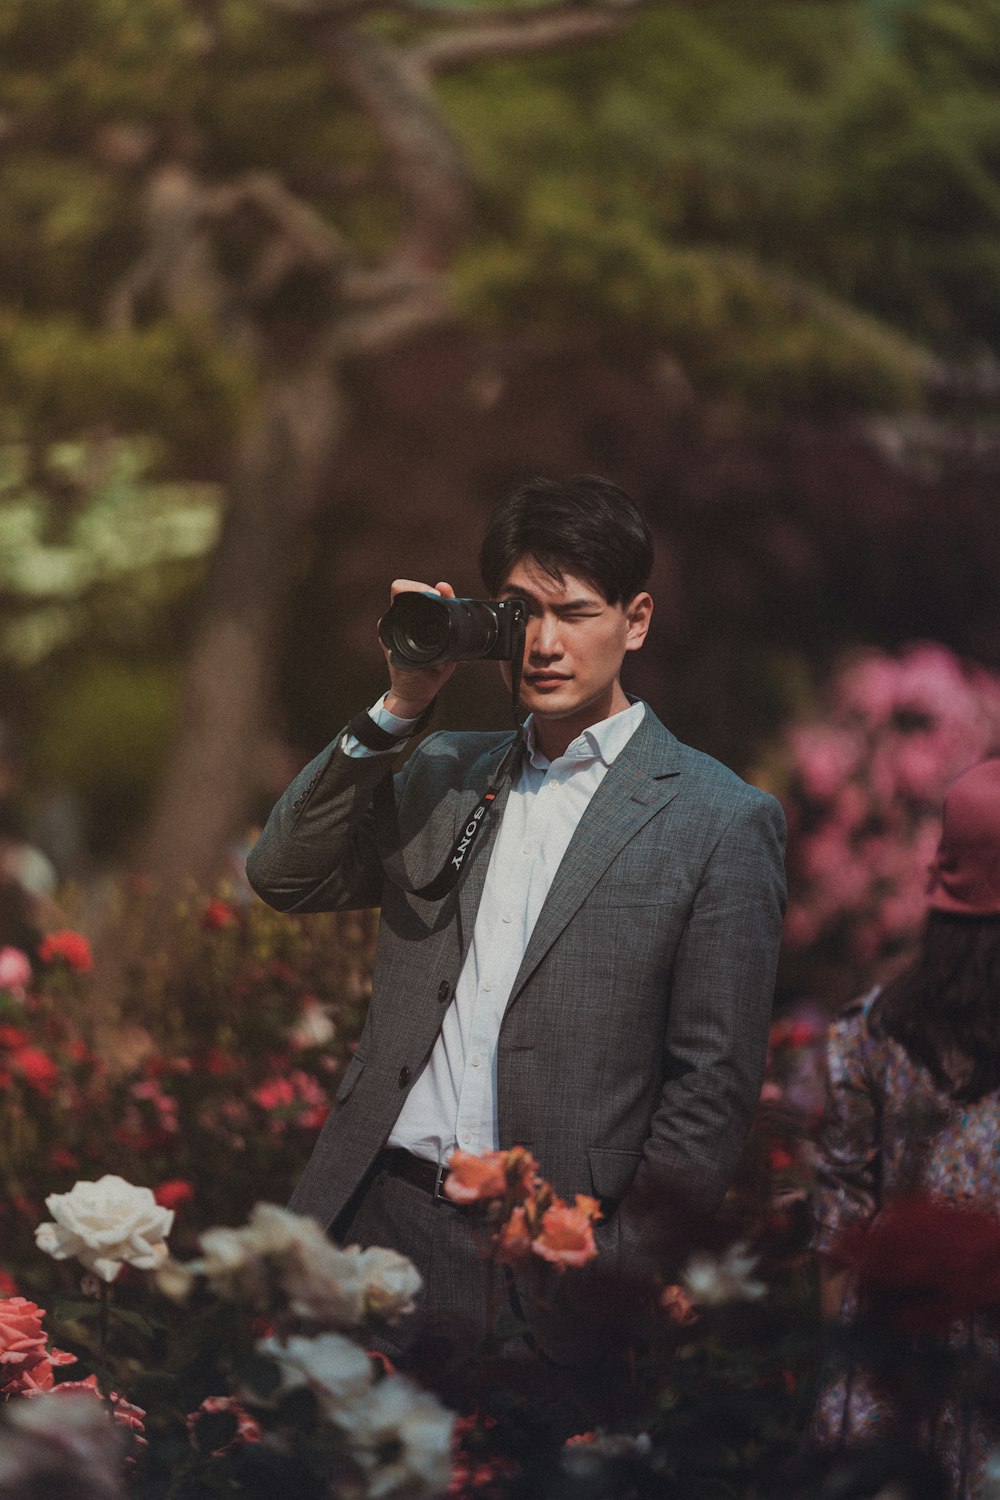 man standing and using DSLR camera in the middle of flower garden